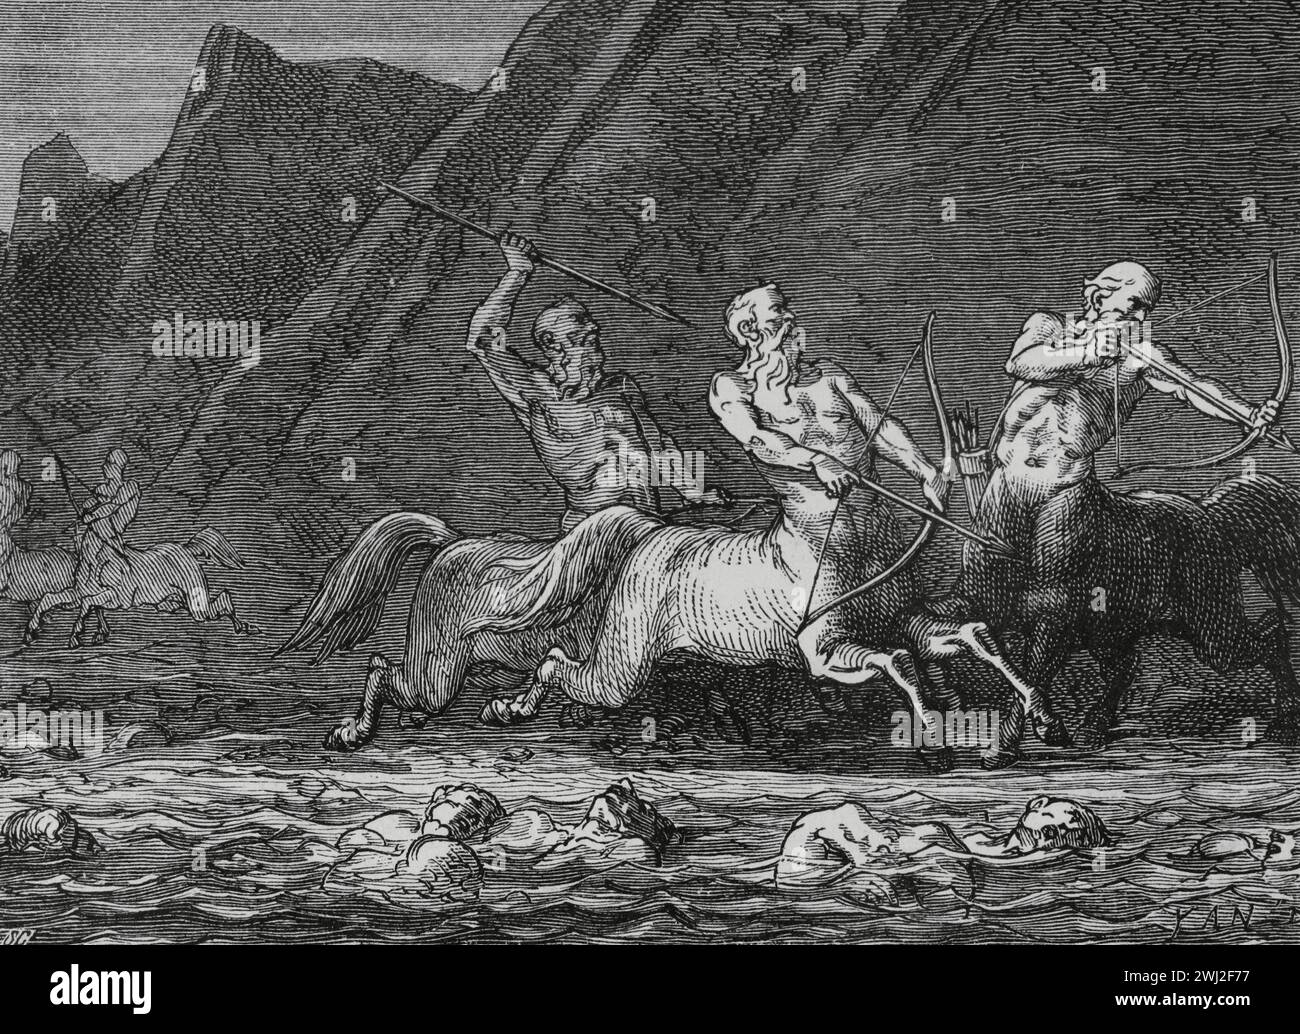 The Divine Comedy (1307-1321). Italian narrative poem by the Italian poet Dante Alighieri (1265-1321). Inferno (Hell). 'Centaurs in file were running...' Illustration by Yann Dargent (1824-1899). Engraving. Published in Paris, 1888. Stock Photo